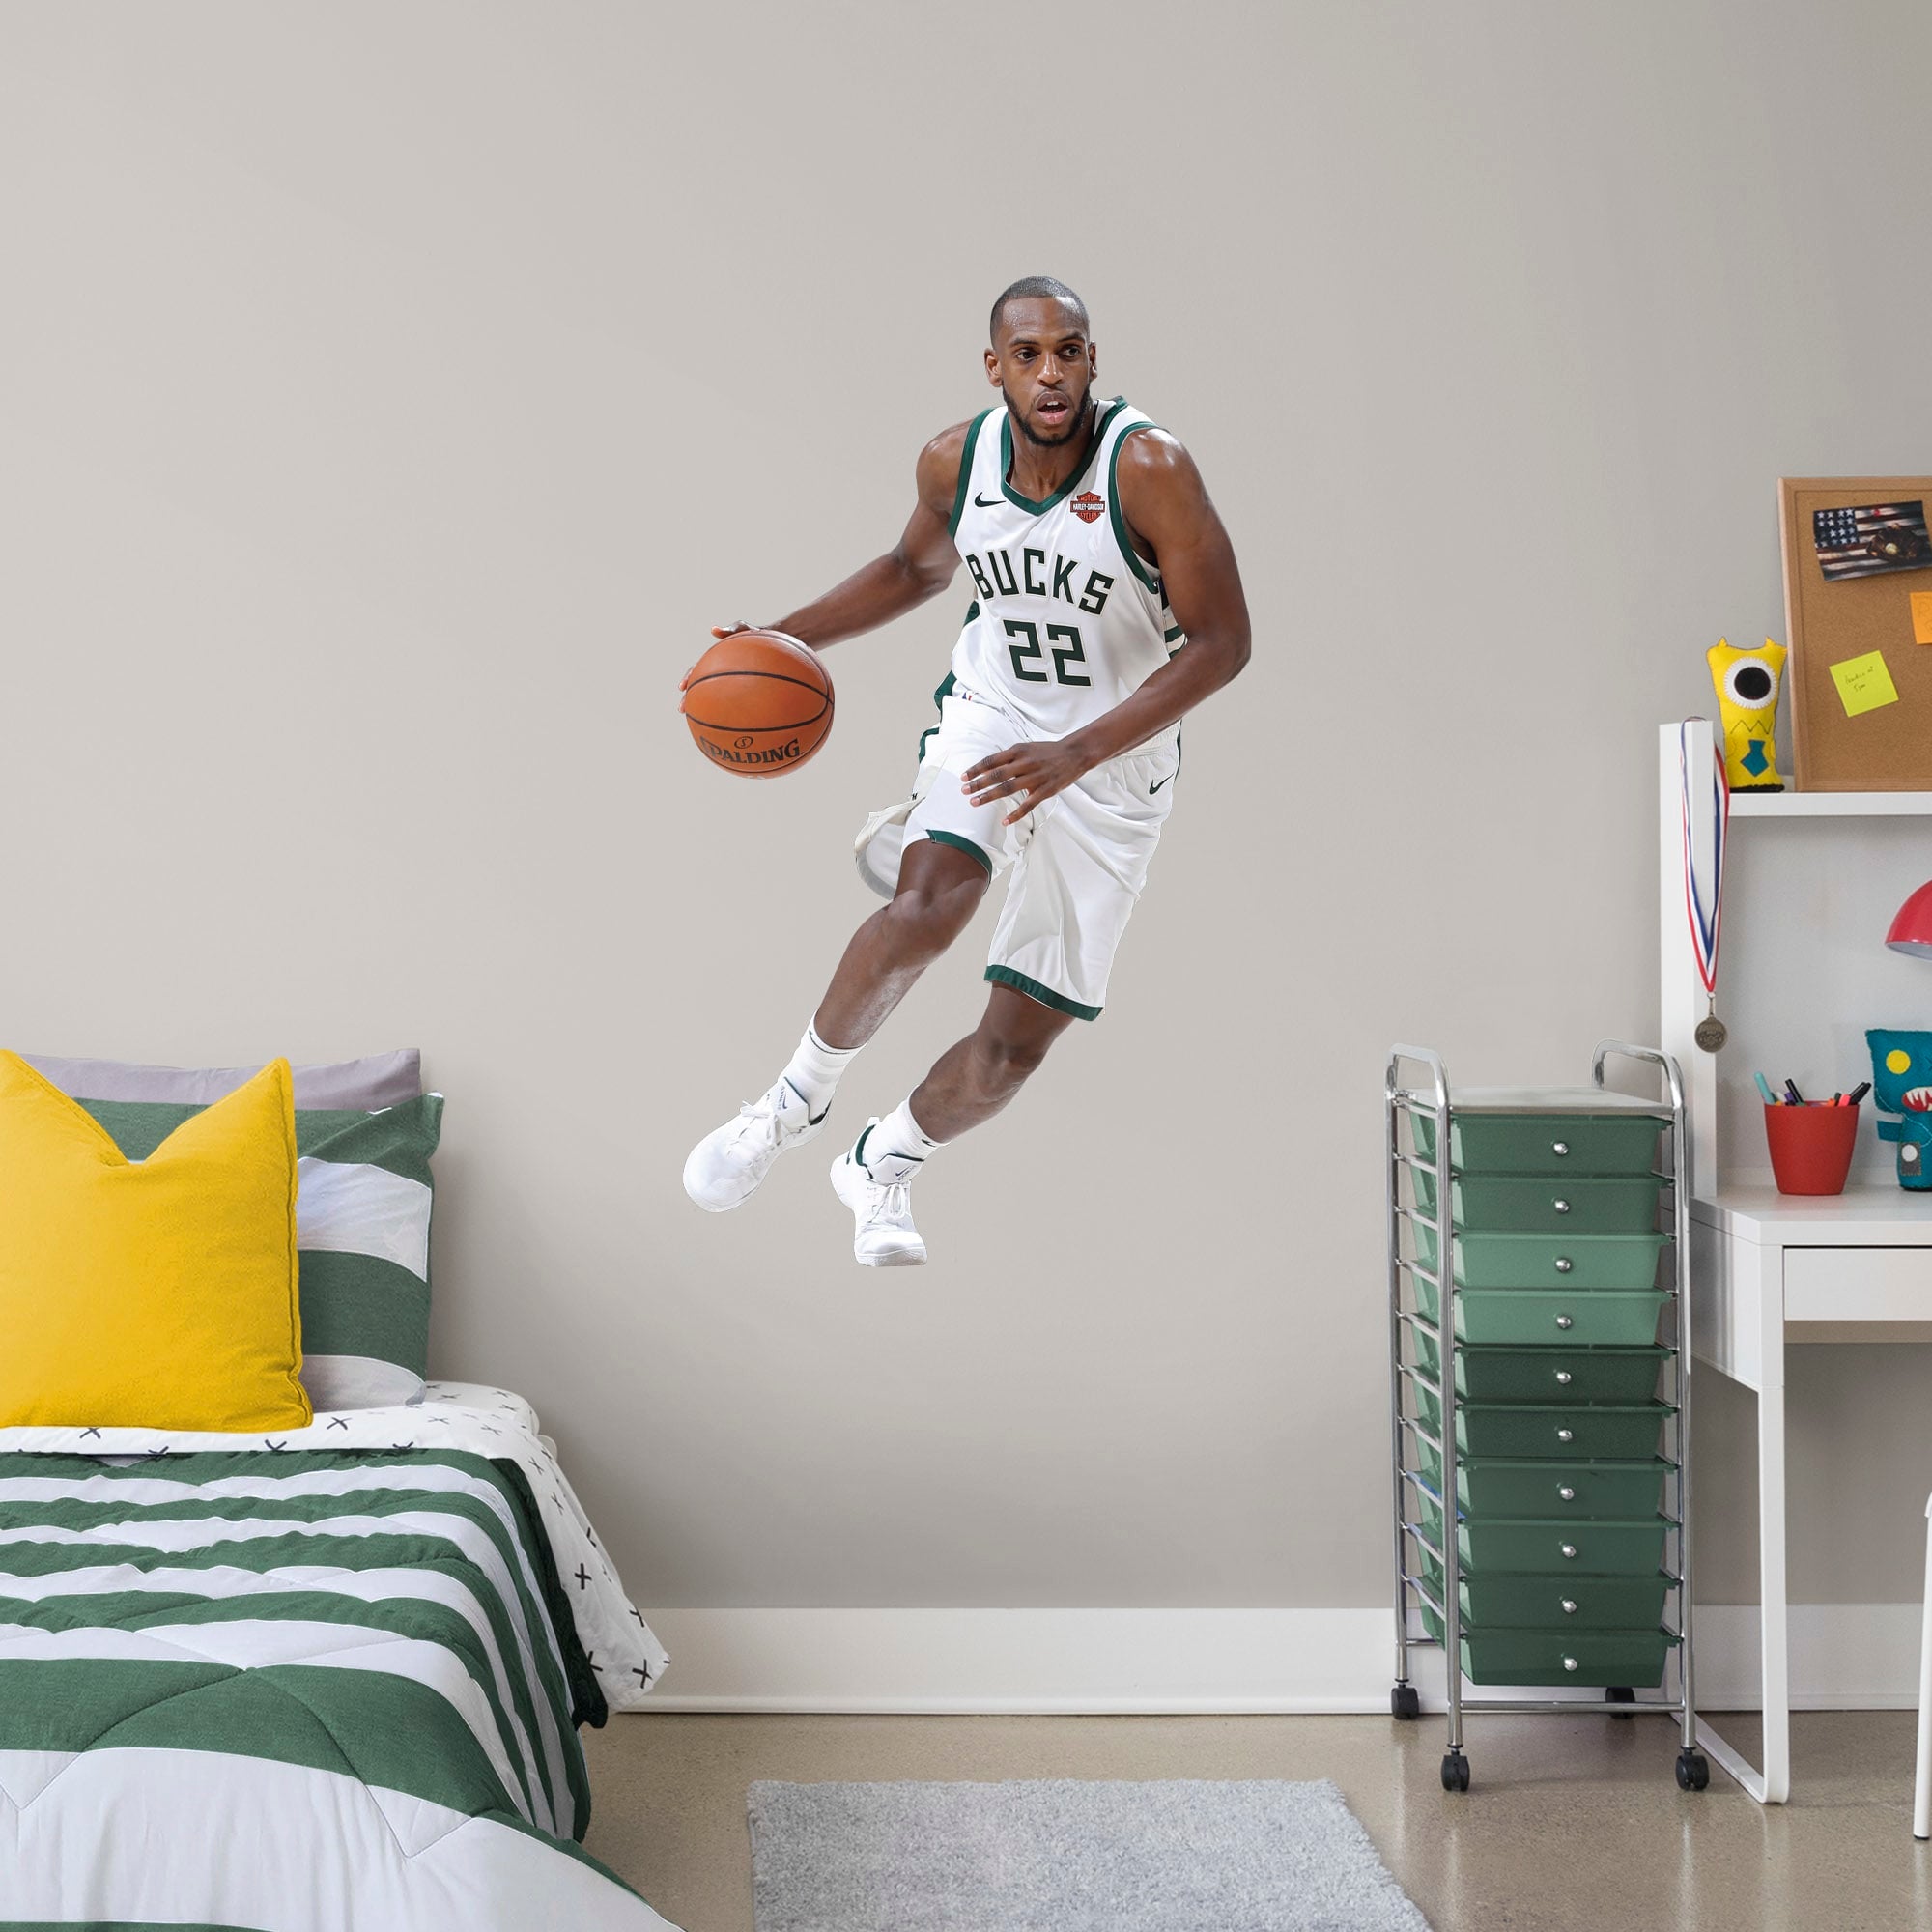 Khris Middleton for Milwaukee Bucks - Officially Licensed NBA Removable Wall Decal Giant Athlete + 2 Decals (29"W x 51"H) by Fat